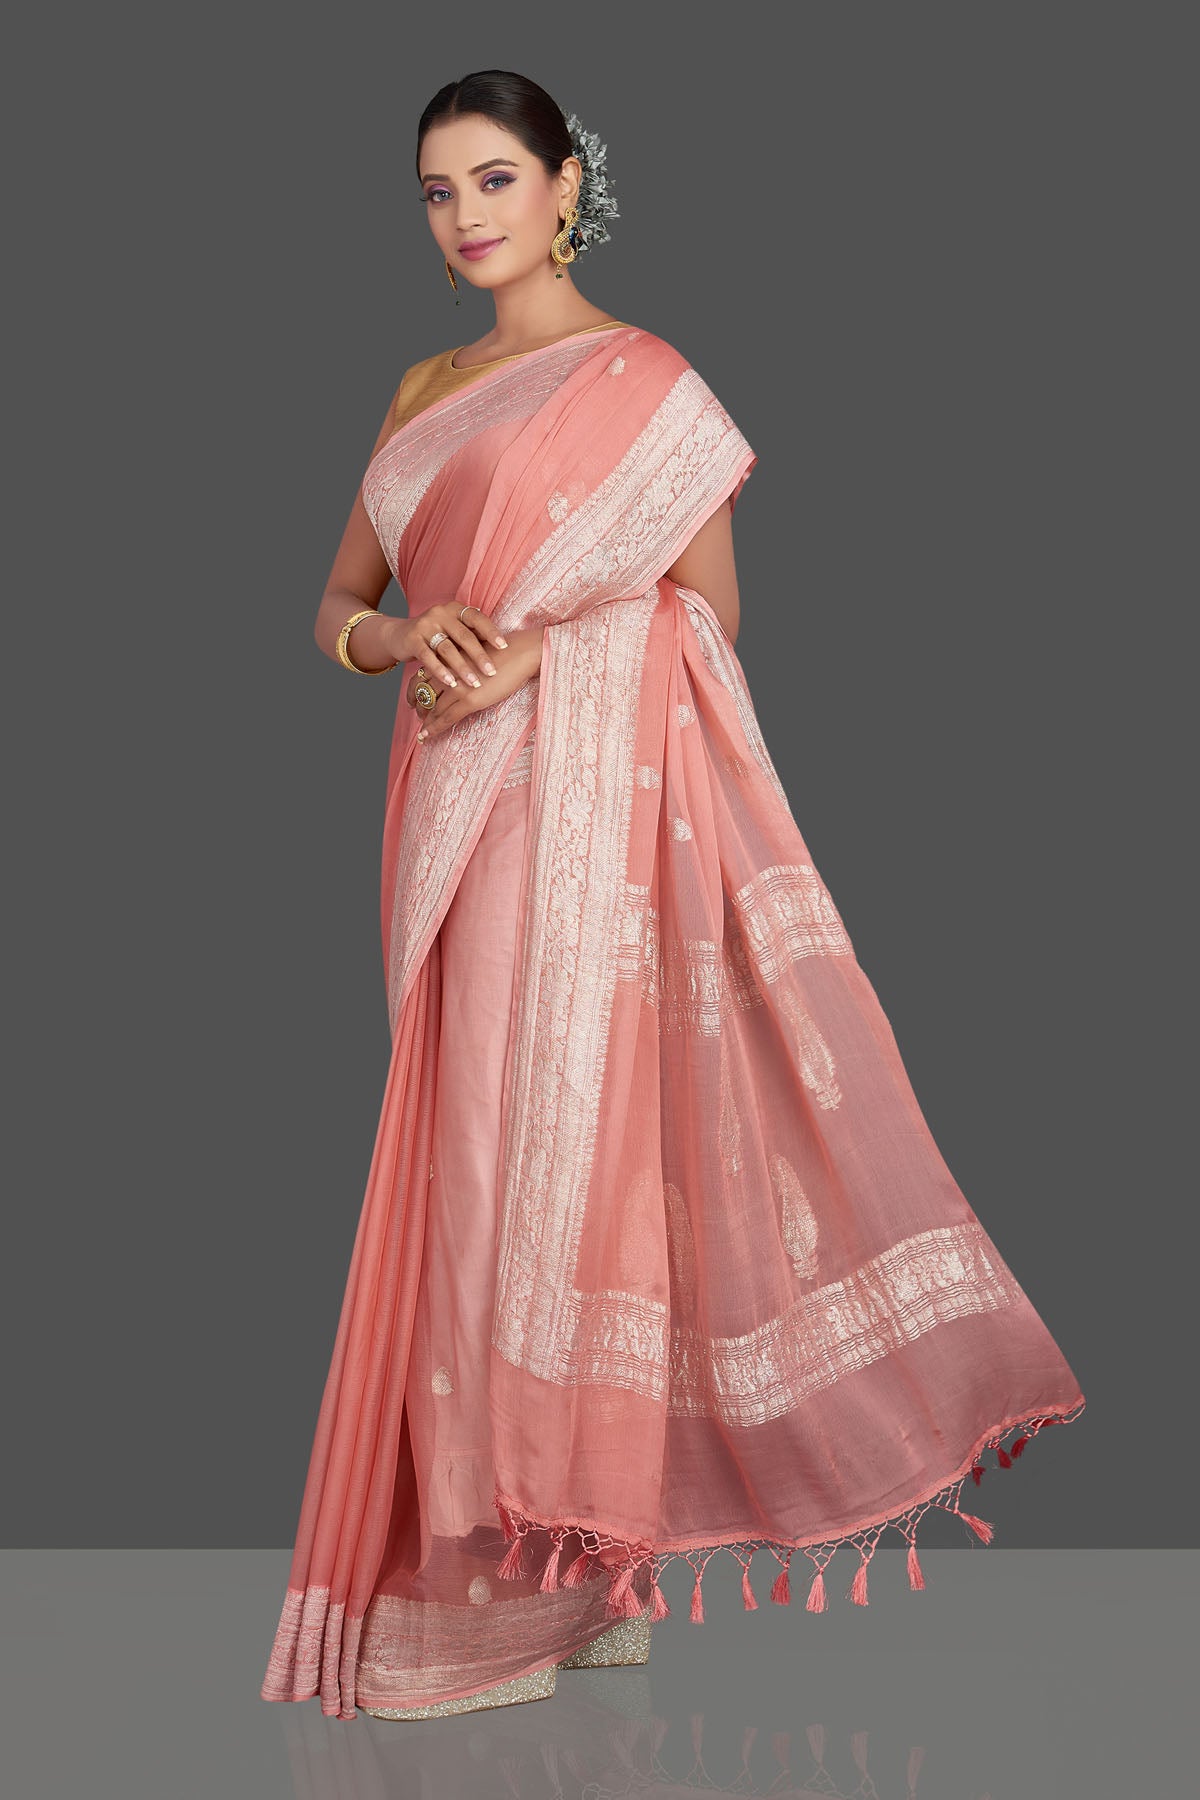 Buy beautiful light pink chiffon georgette saree online in USA with silver zari border. Look your best on special occasions with stunning Banarasi sarees, pure silk saris, tussar saris, handwoven sarees from Pure Elegance Indian saree store in USA.-pallu